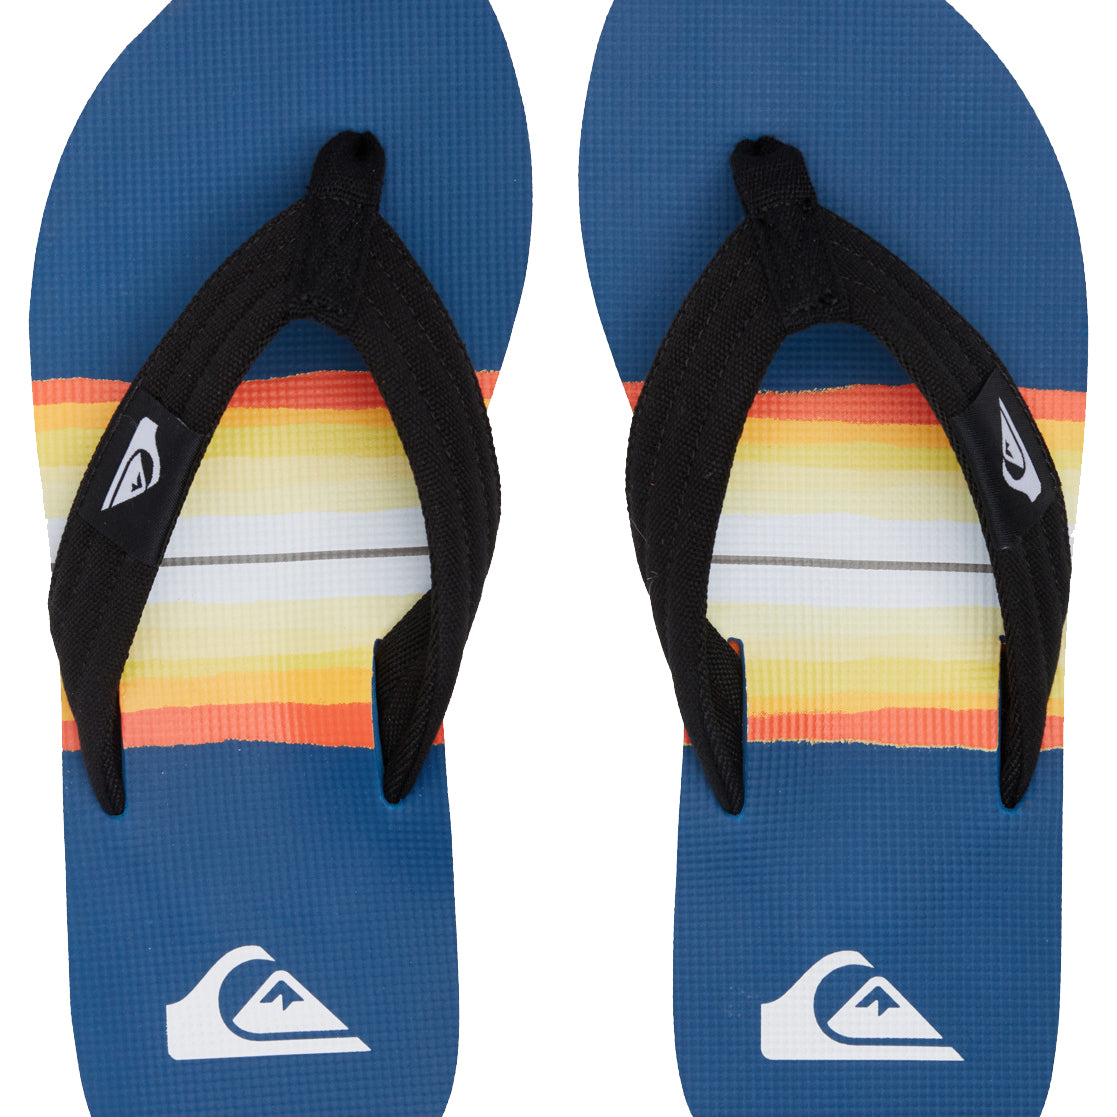 Quiksilver Molokai Layback Youth Sandal BYJ2-Blue 2 10 C